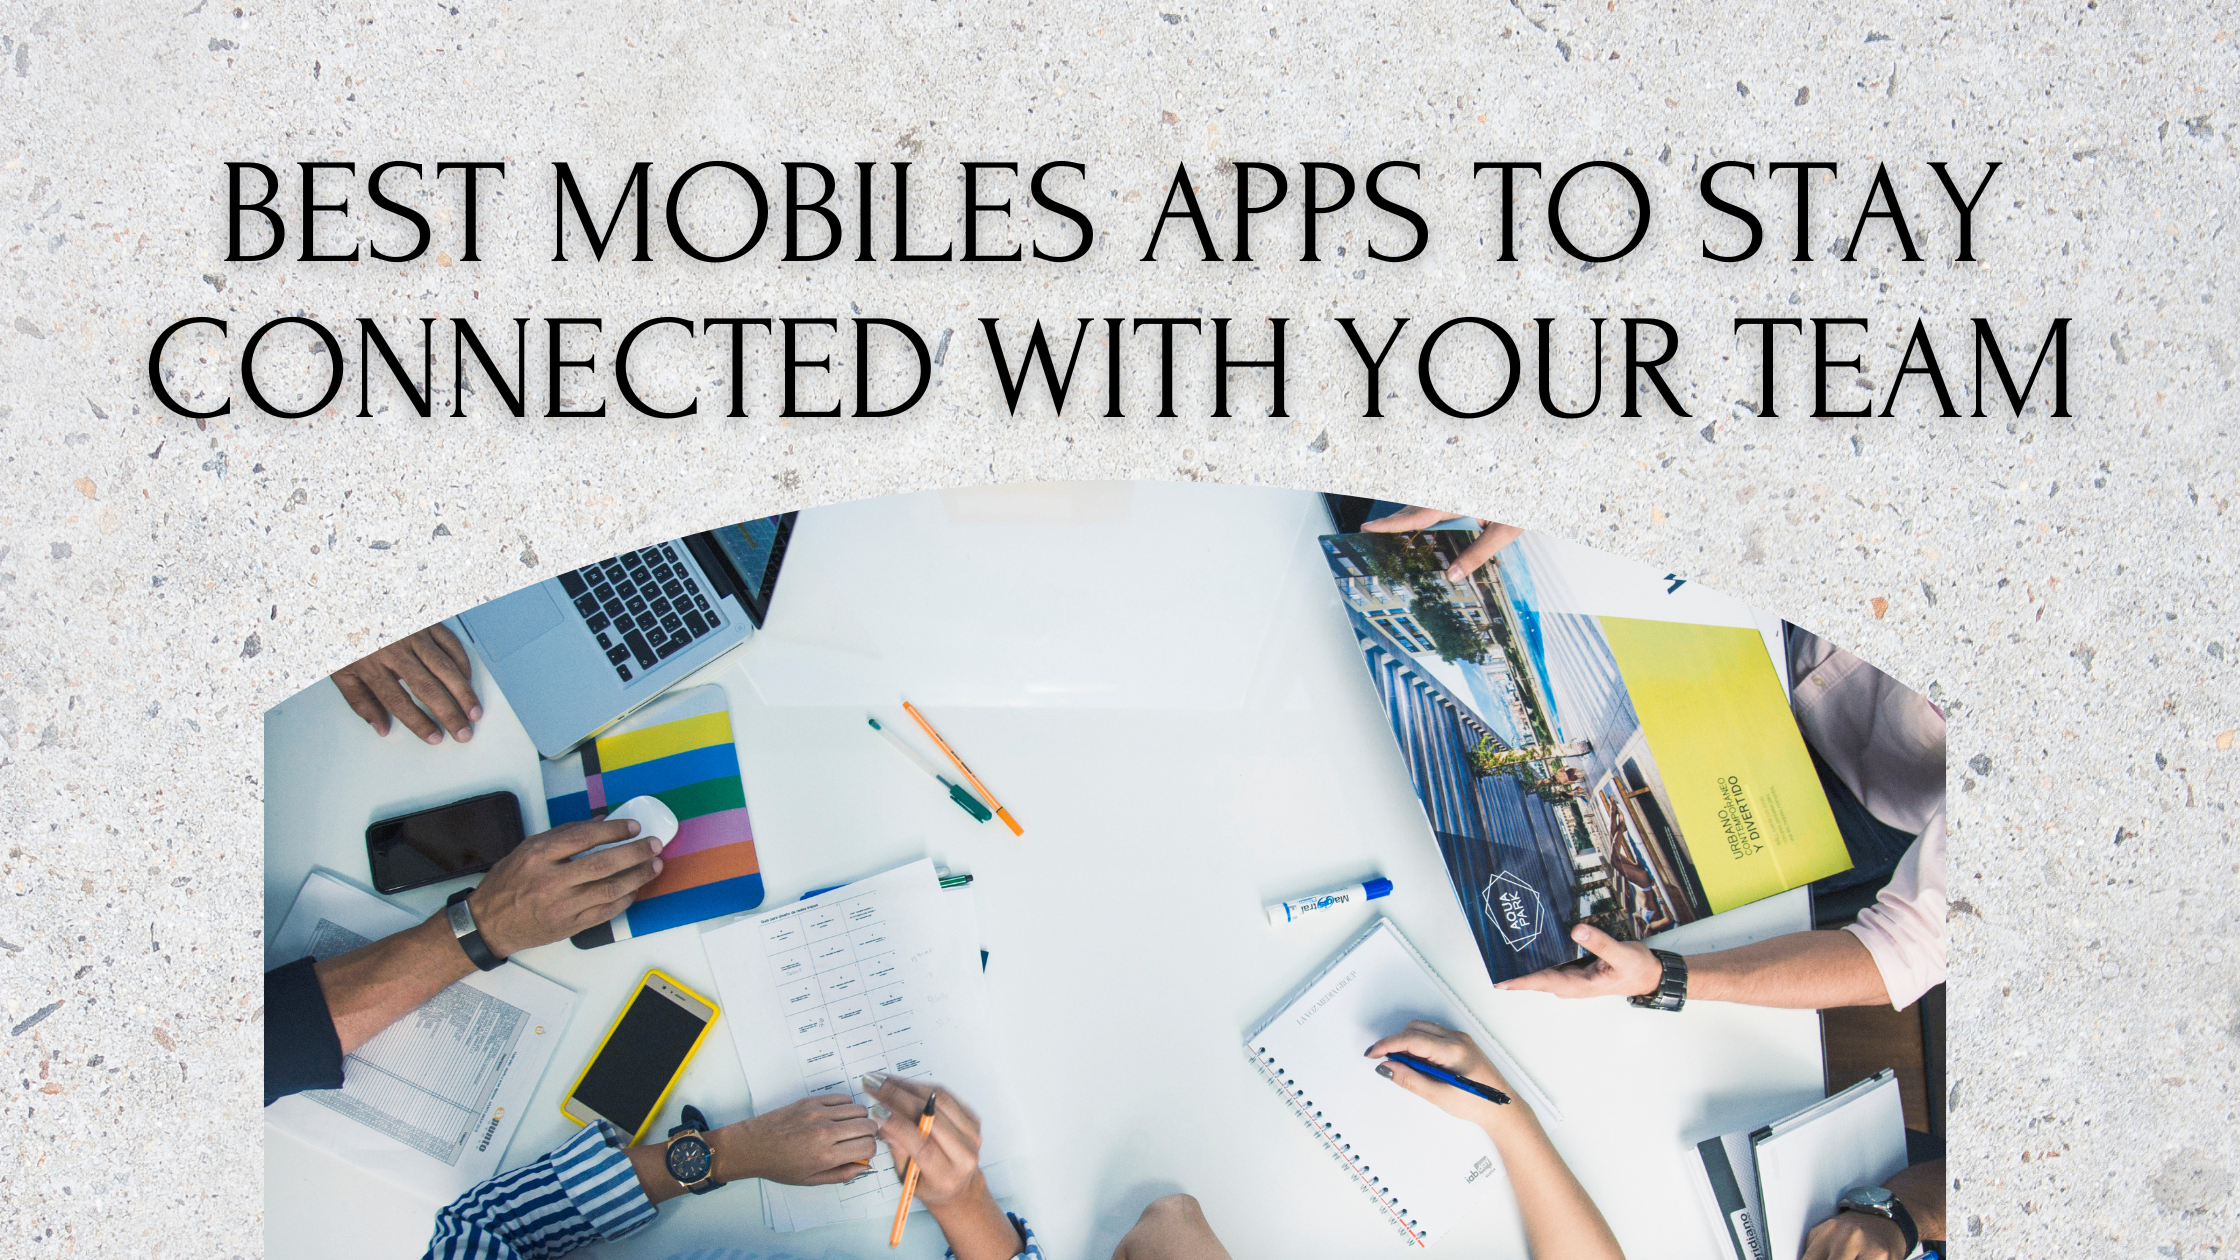 Best Mobiles Apps to Stay Connected With your Team